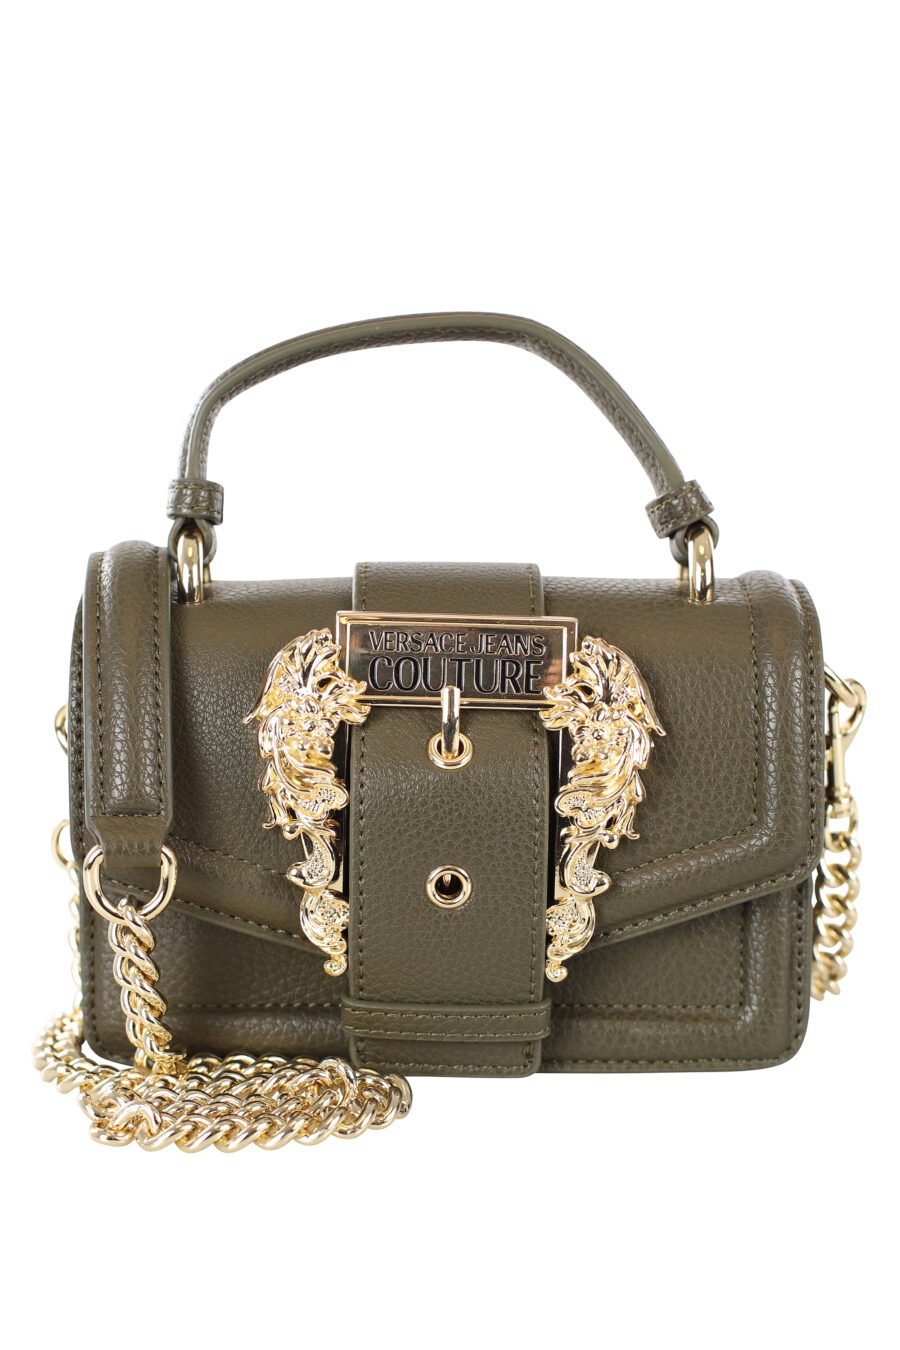 Military green mini shoulder bag with logo baroque buckle - IMG 7219